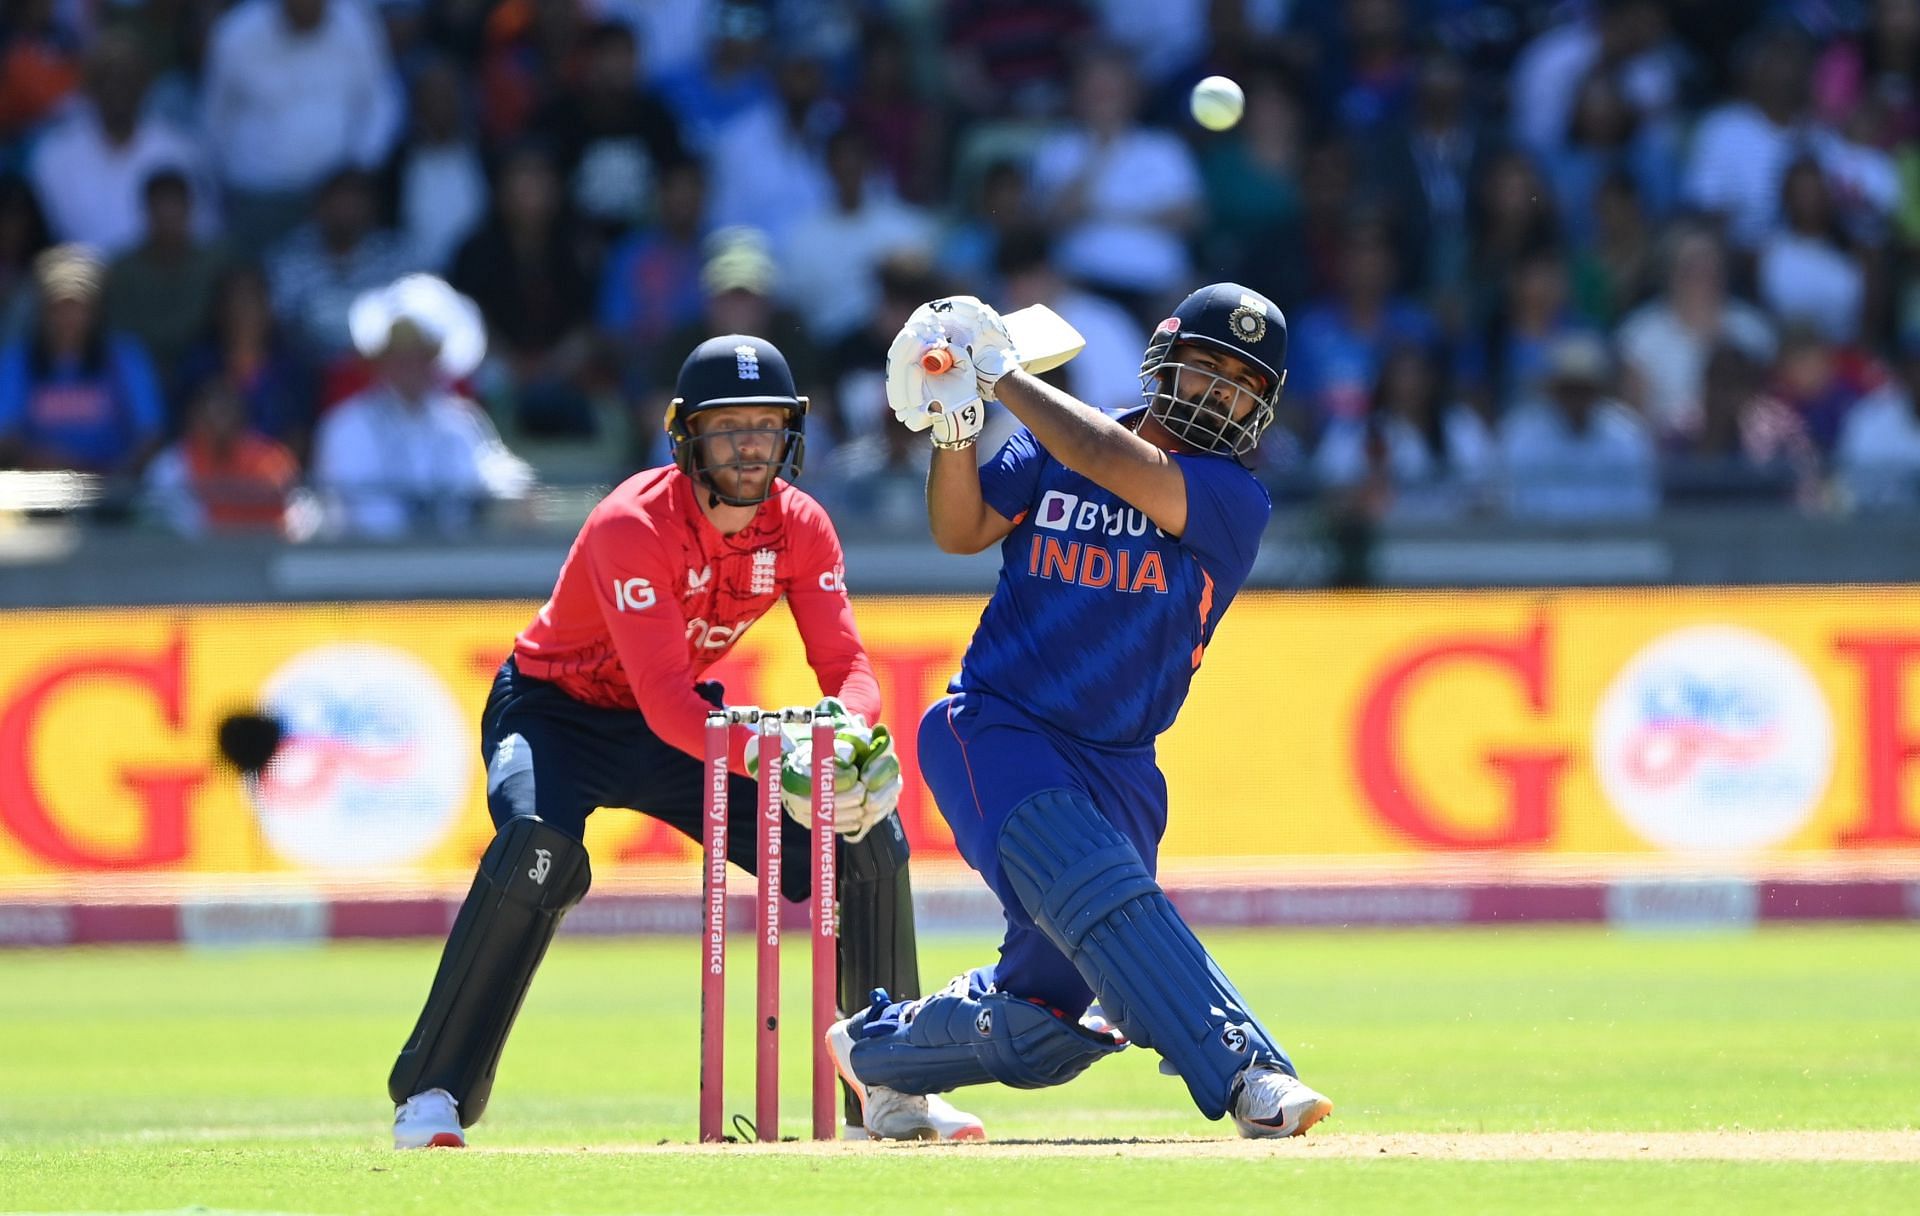 Rishabh Pant scored 26 runs off 15 balls in the second T20I against England